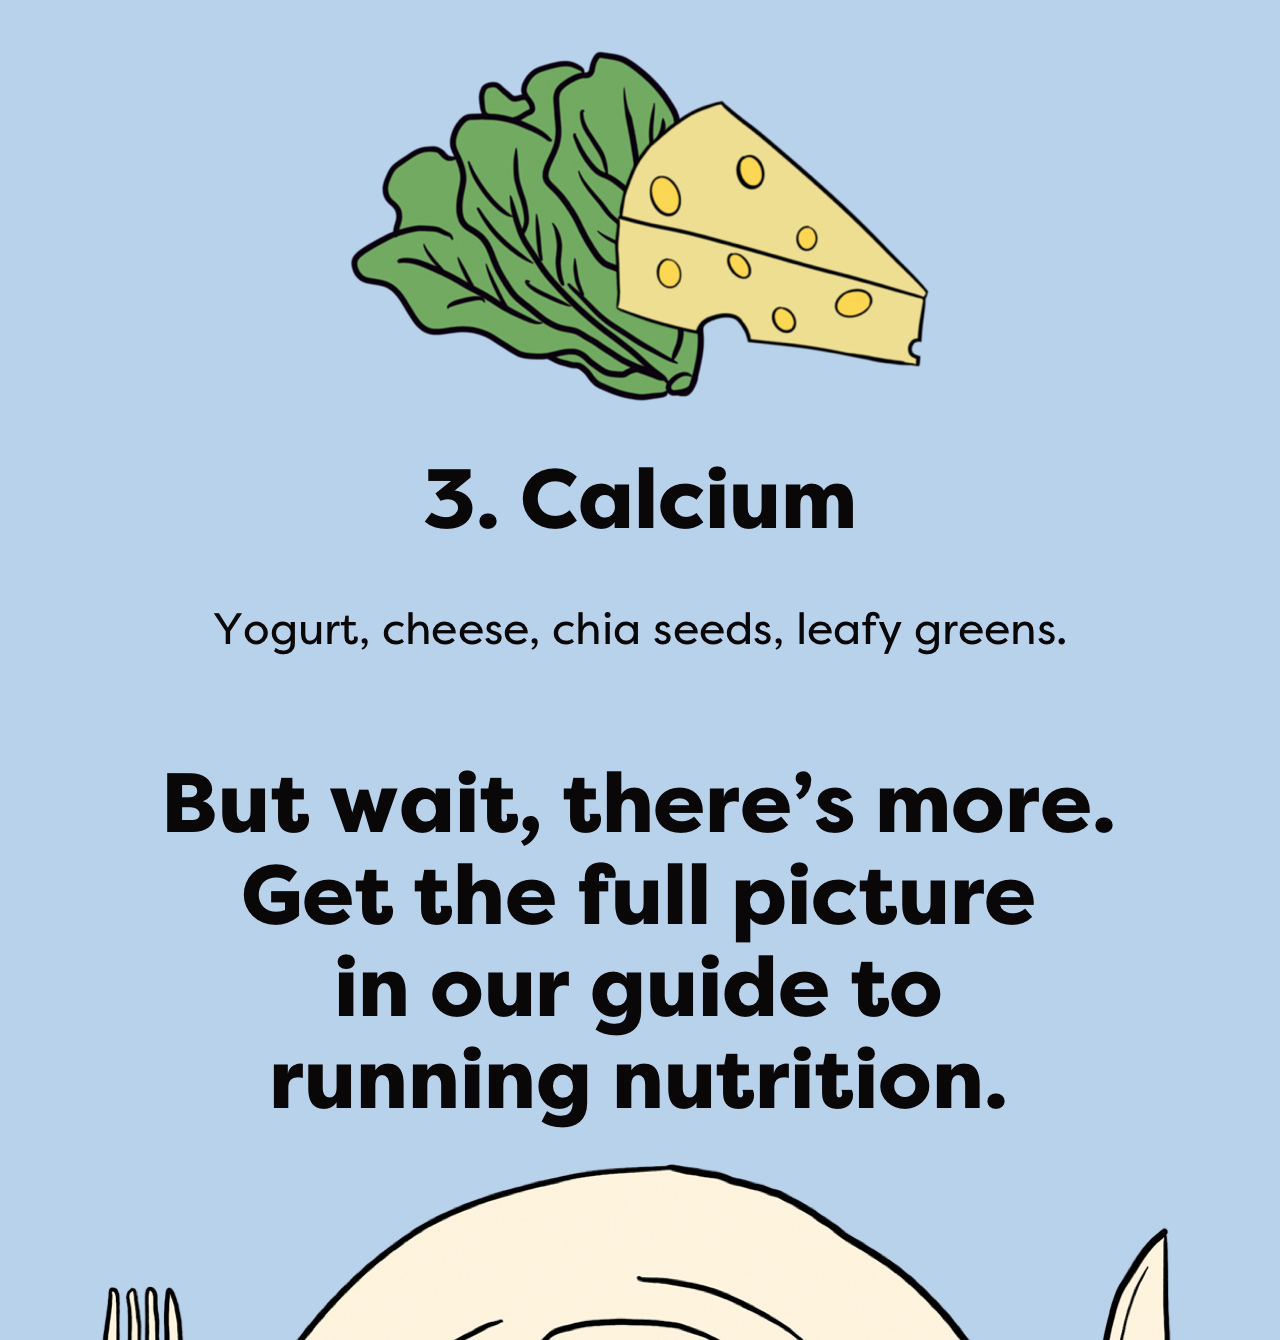 3. Calcium - Yogurt, cheese, chia seeds, leafy greens. - But wait, there's more. Get the full picture in our guide to running nutrition.